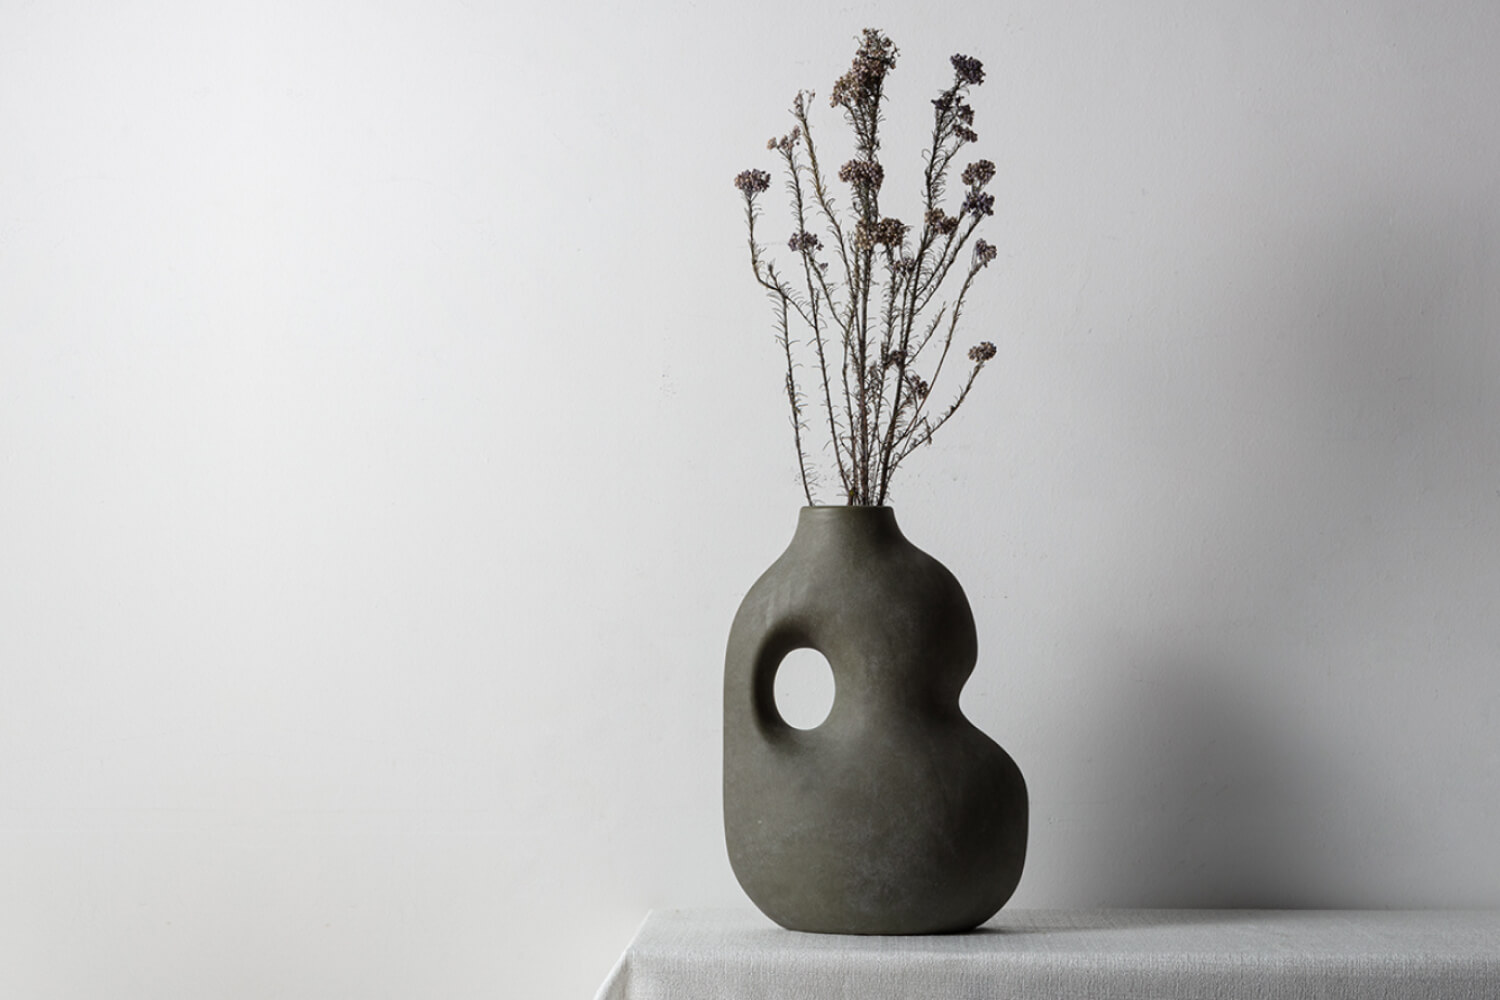 Willow Decorative Sculptural Faded Earth Grey Rustic Wabi Sabi Ceramic Vase set against a neutral wall on a draped tablecloth.